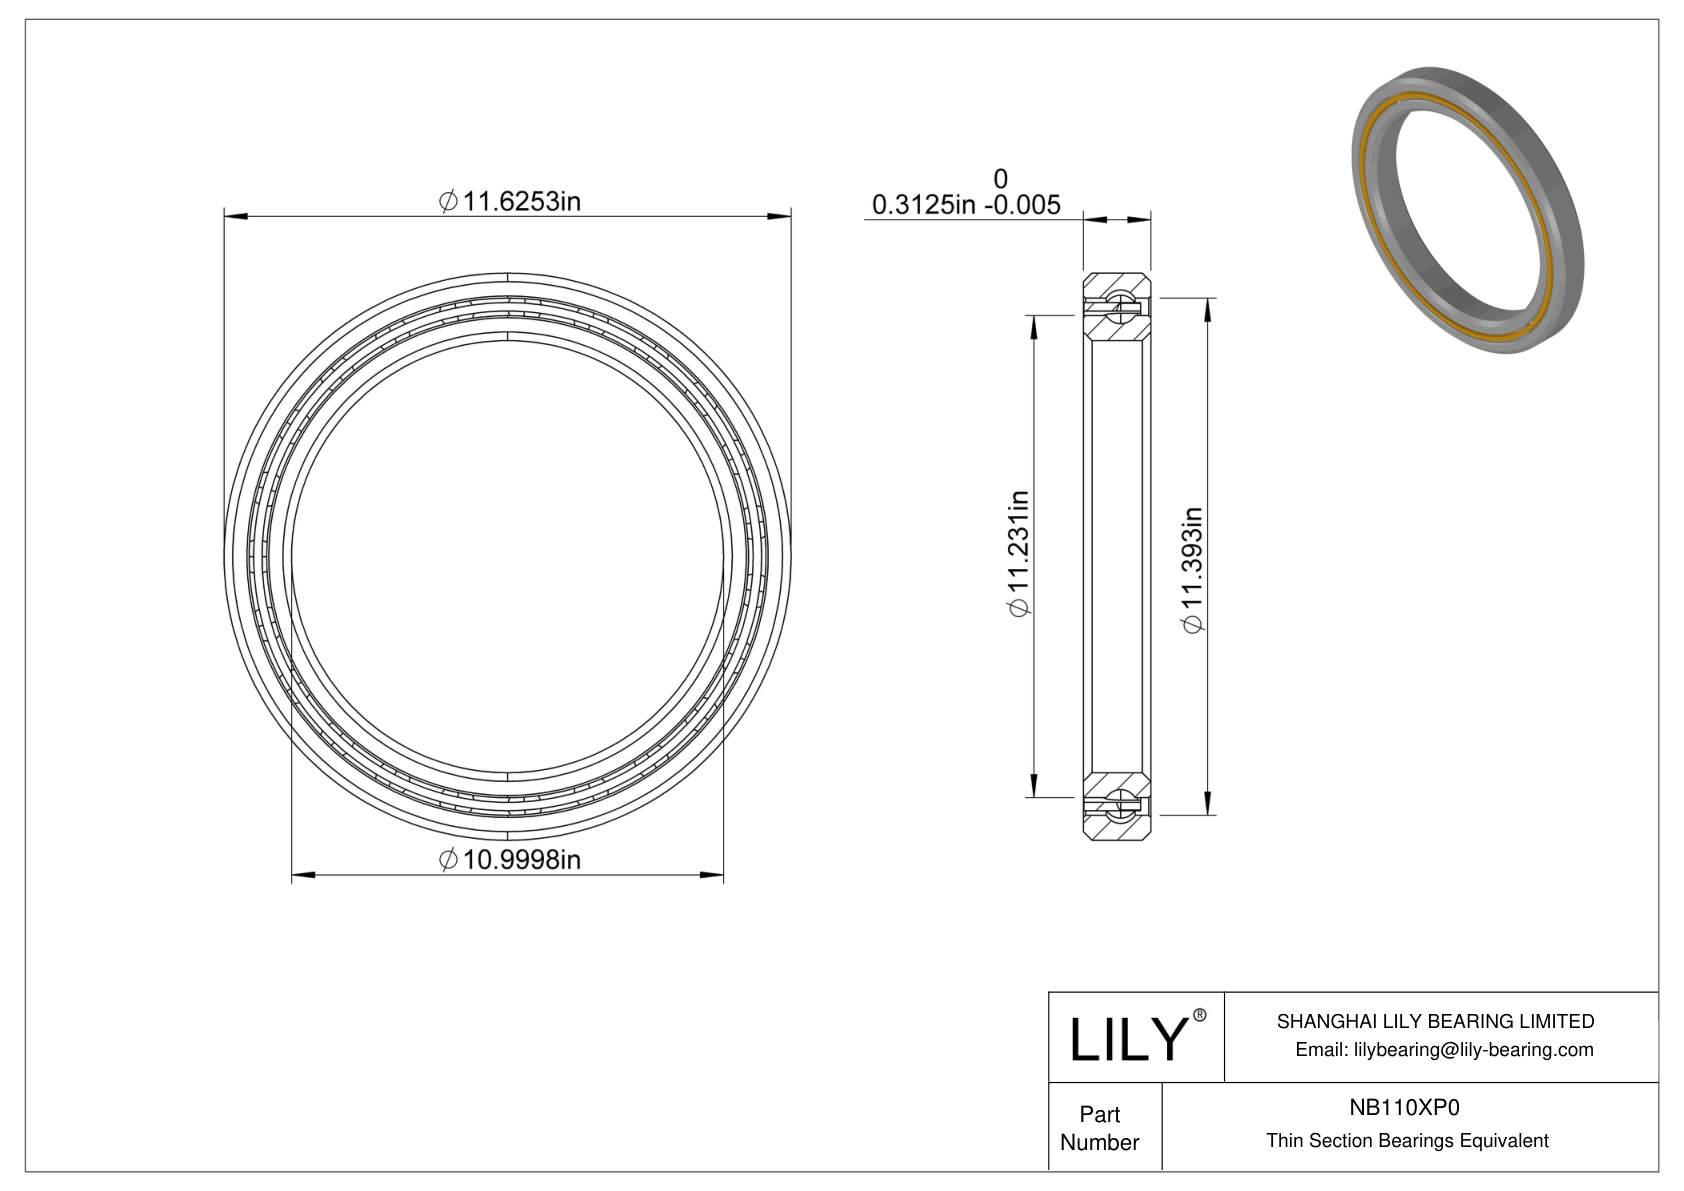 NB110XP0 Constant Section (CS) Bearings cad drawing